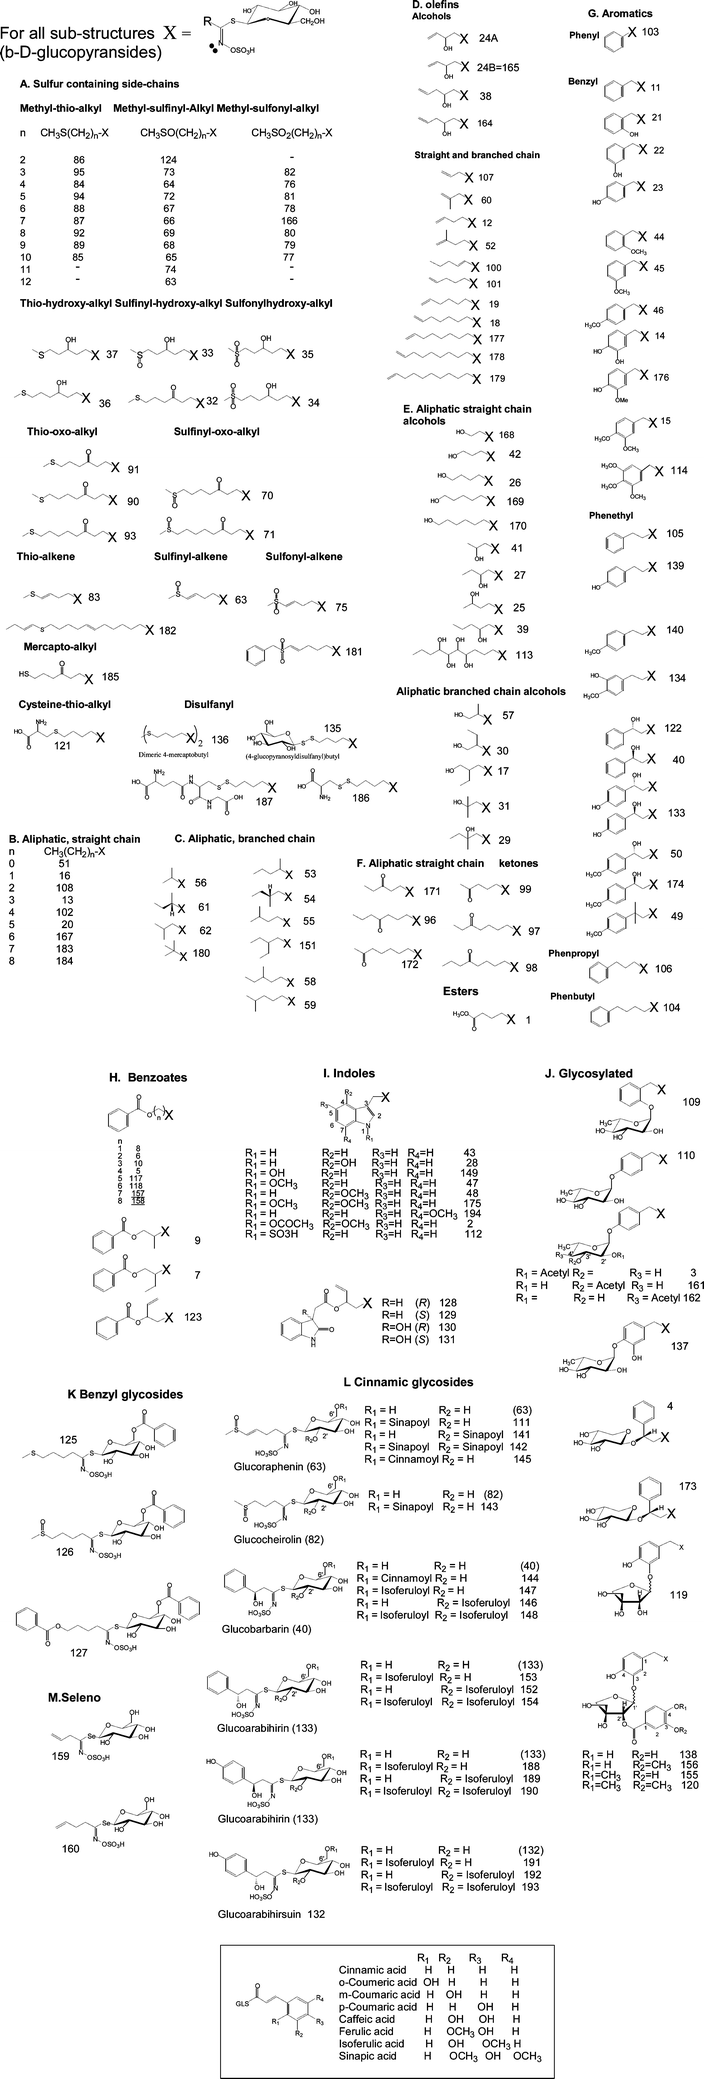 Reported glucosinolates structures by chemical class. A thorough literature review has lead to a much greater number of individual glucosinolates being characterized than previously thought. This reflects the absence of any major reviews or advances in this area since 2001. We currently have listed 200 structures, for a LC-TOF-MS screening library, with e.g. 32 of these being of relevance to the UK diet.